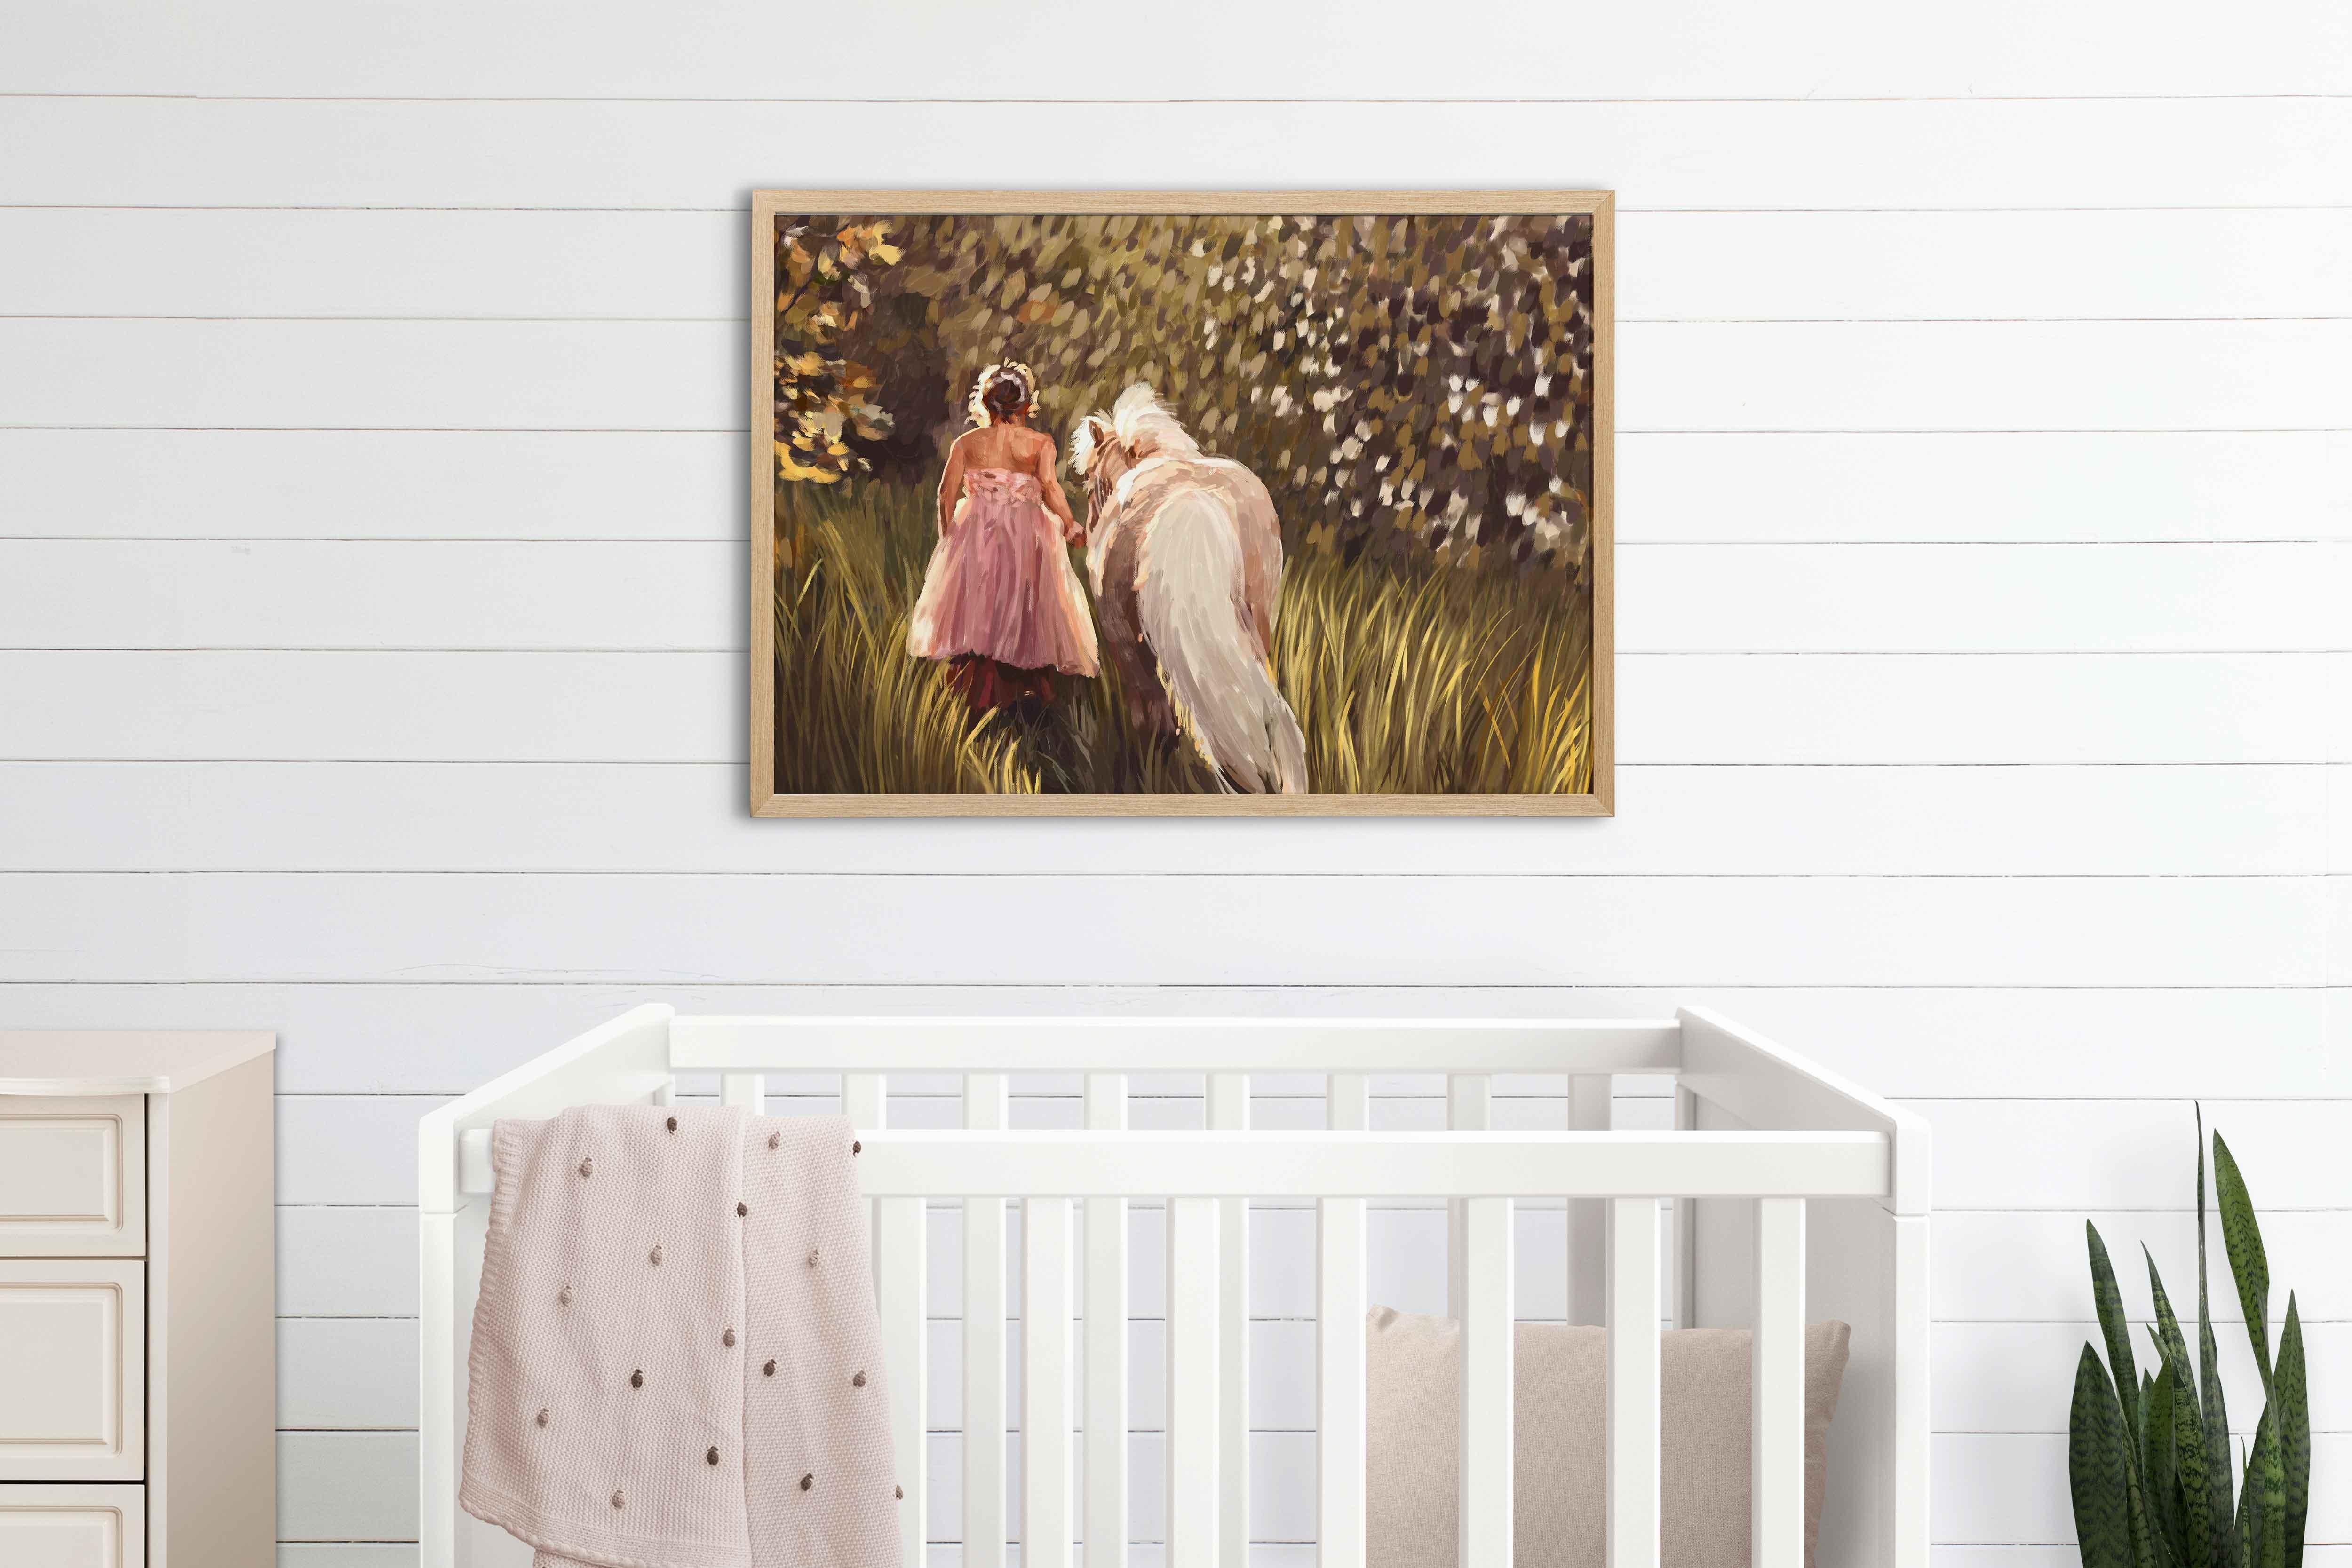 Nursery Wall Art: What to look for designing your perfect nursery -Haven-Prints